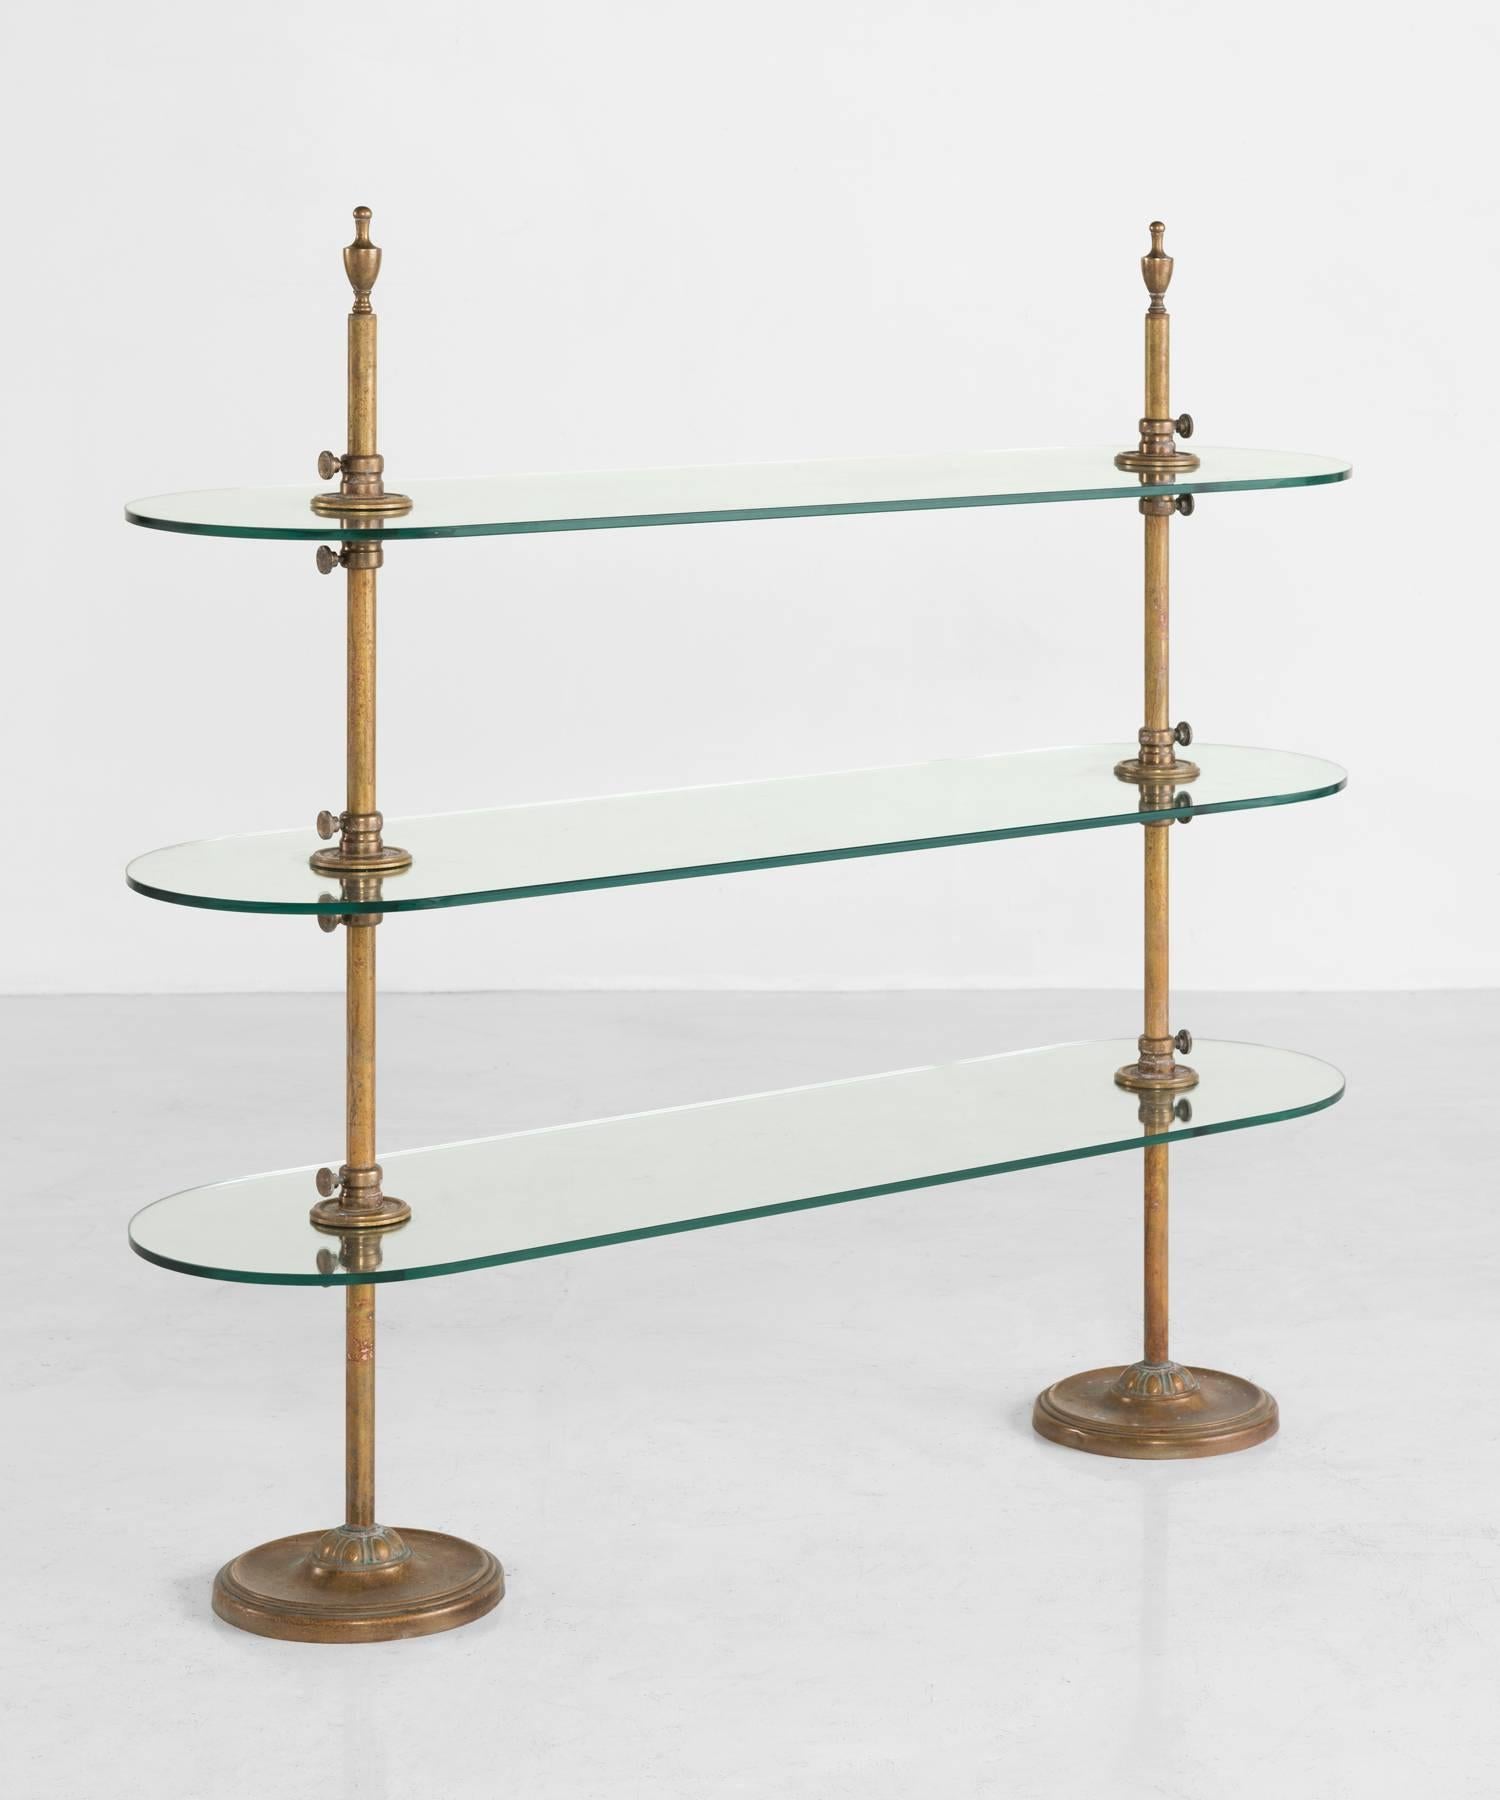 Brass and glass bistro shelving unit, circa 1910.

Adjustable brass shelving with pillar supports on circular bases accommodating three heavy clear glass shelves.